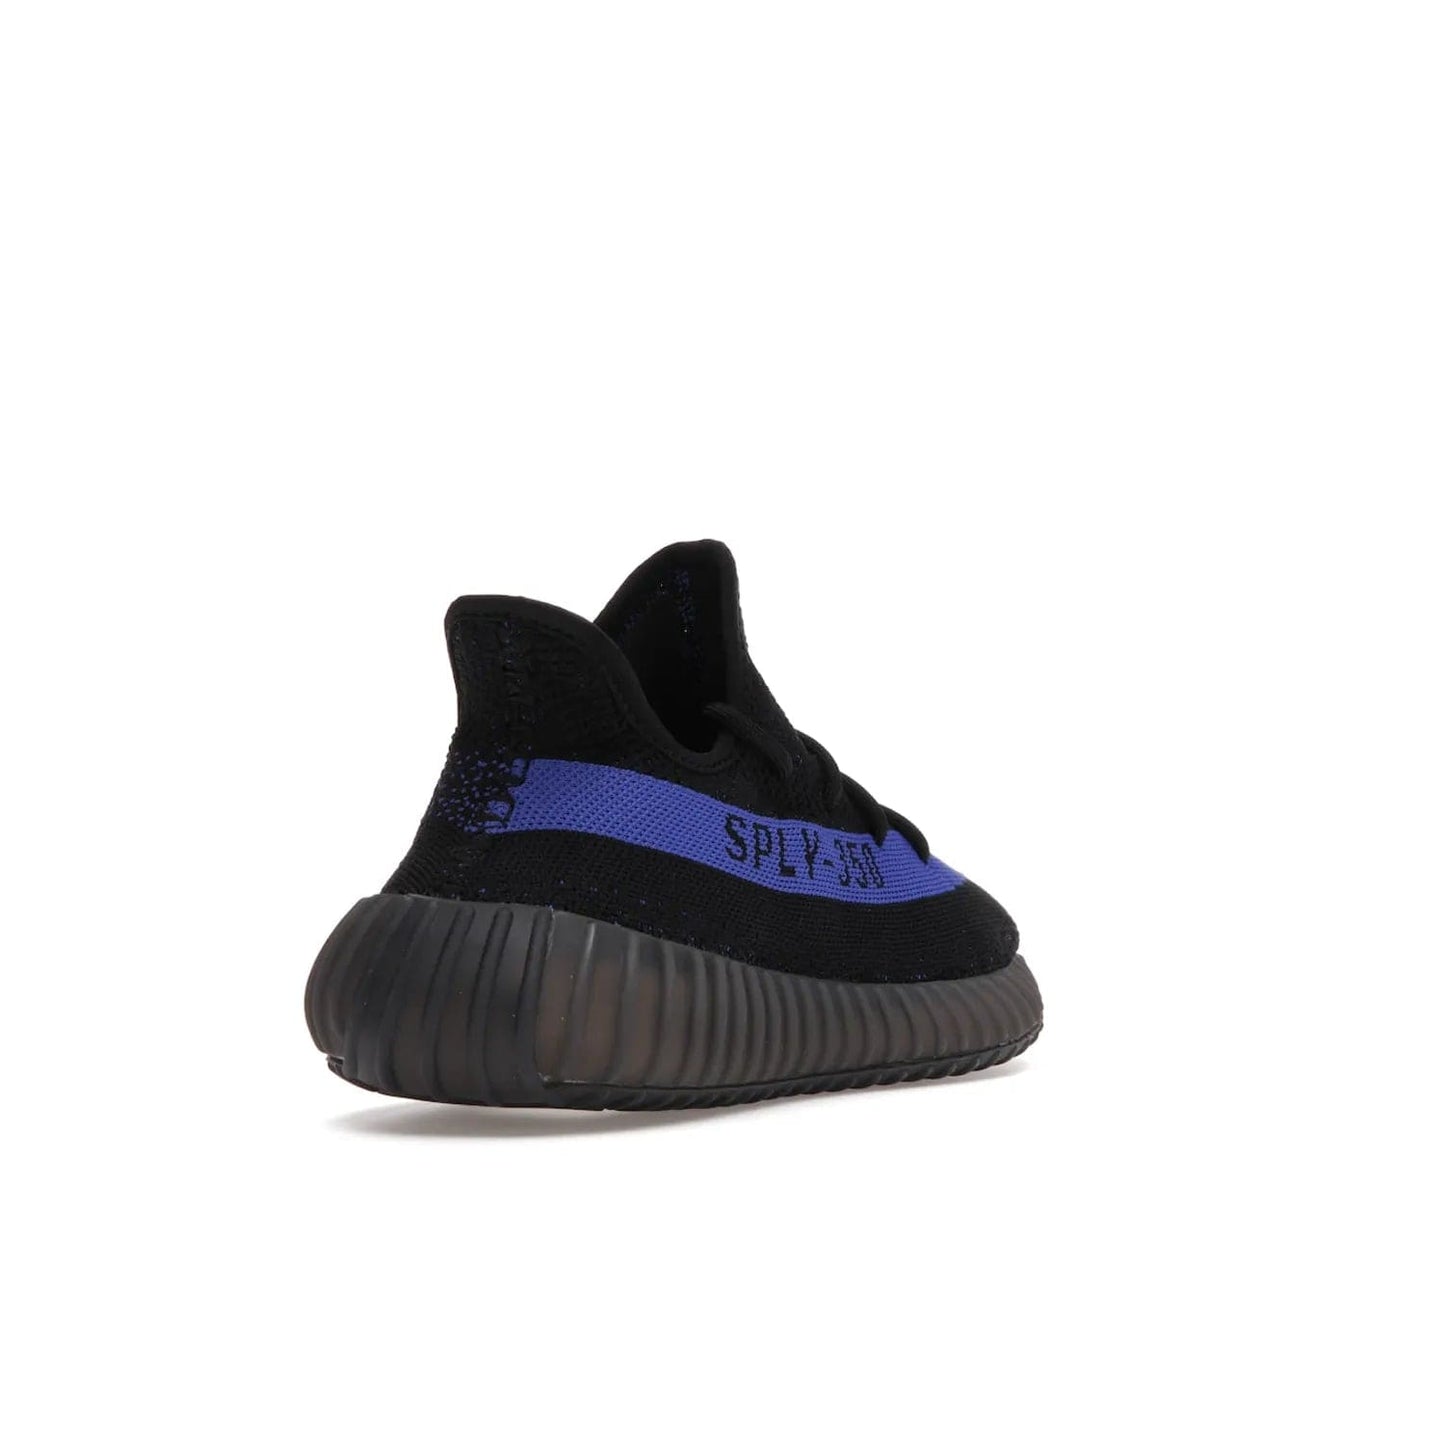 adidas Yeezy Boost 350 V2 Dazzling Blue - Image 31 - Only at www.BallersClubKickz.com - Shop the Adidas Yeezy 350 V2 Dazzling Blue, featuring a solid black Primeknit upper, Dazzling Blue side stripe, “SPLY-350” text, and a muted Boost sole. Releasing Feb 2022, this style is perfect for any shoe fan.